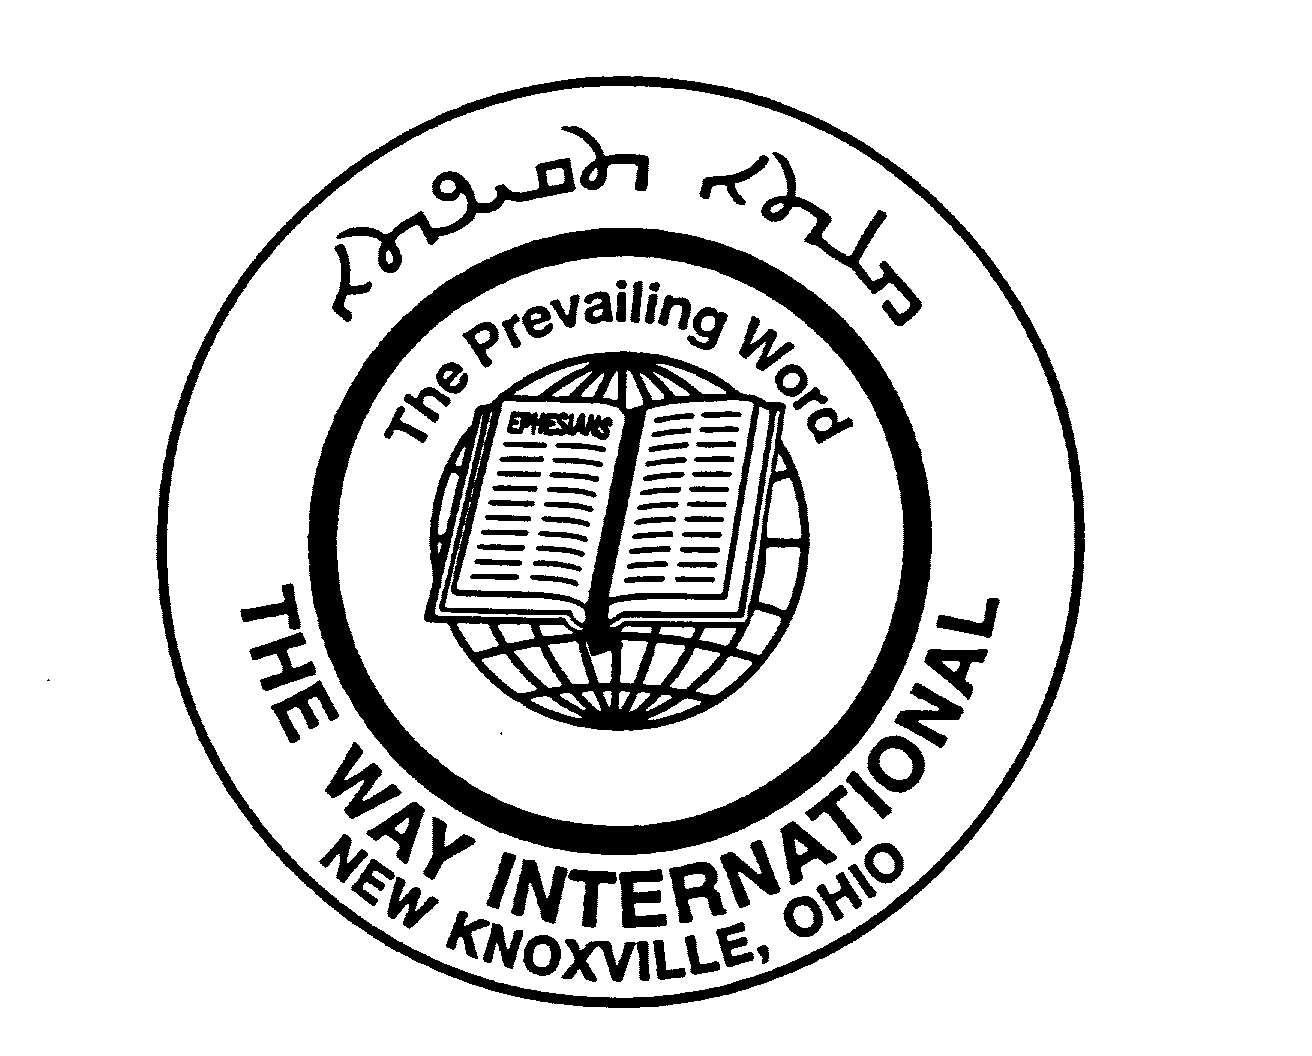  THE WAY INTERNATIONAL NEW KNOXVILLE, OHIO THE PREVAILING WORD